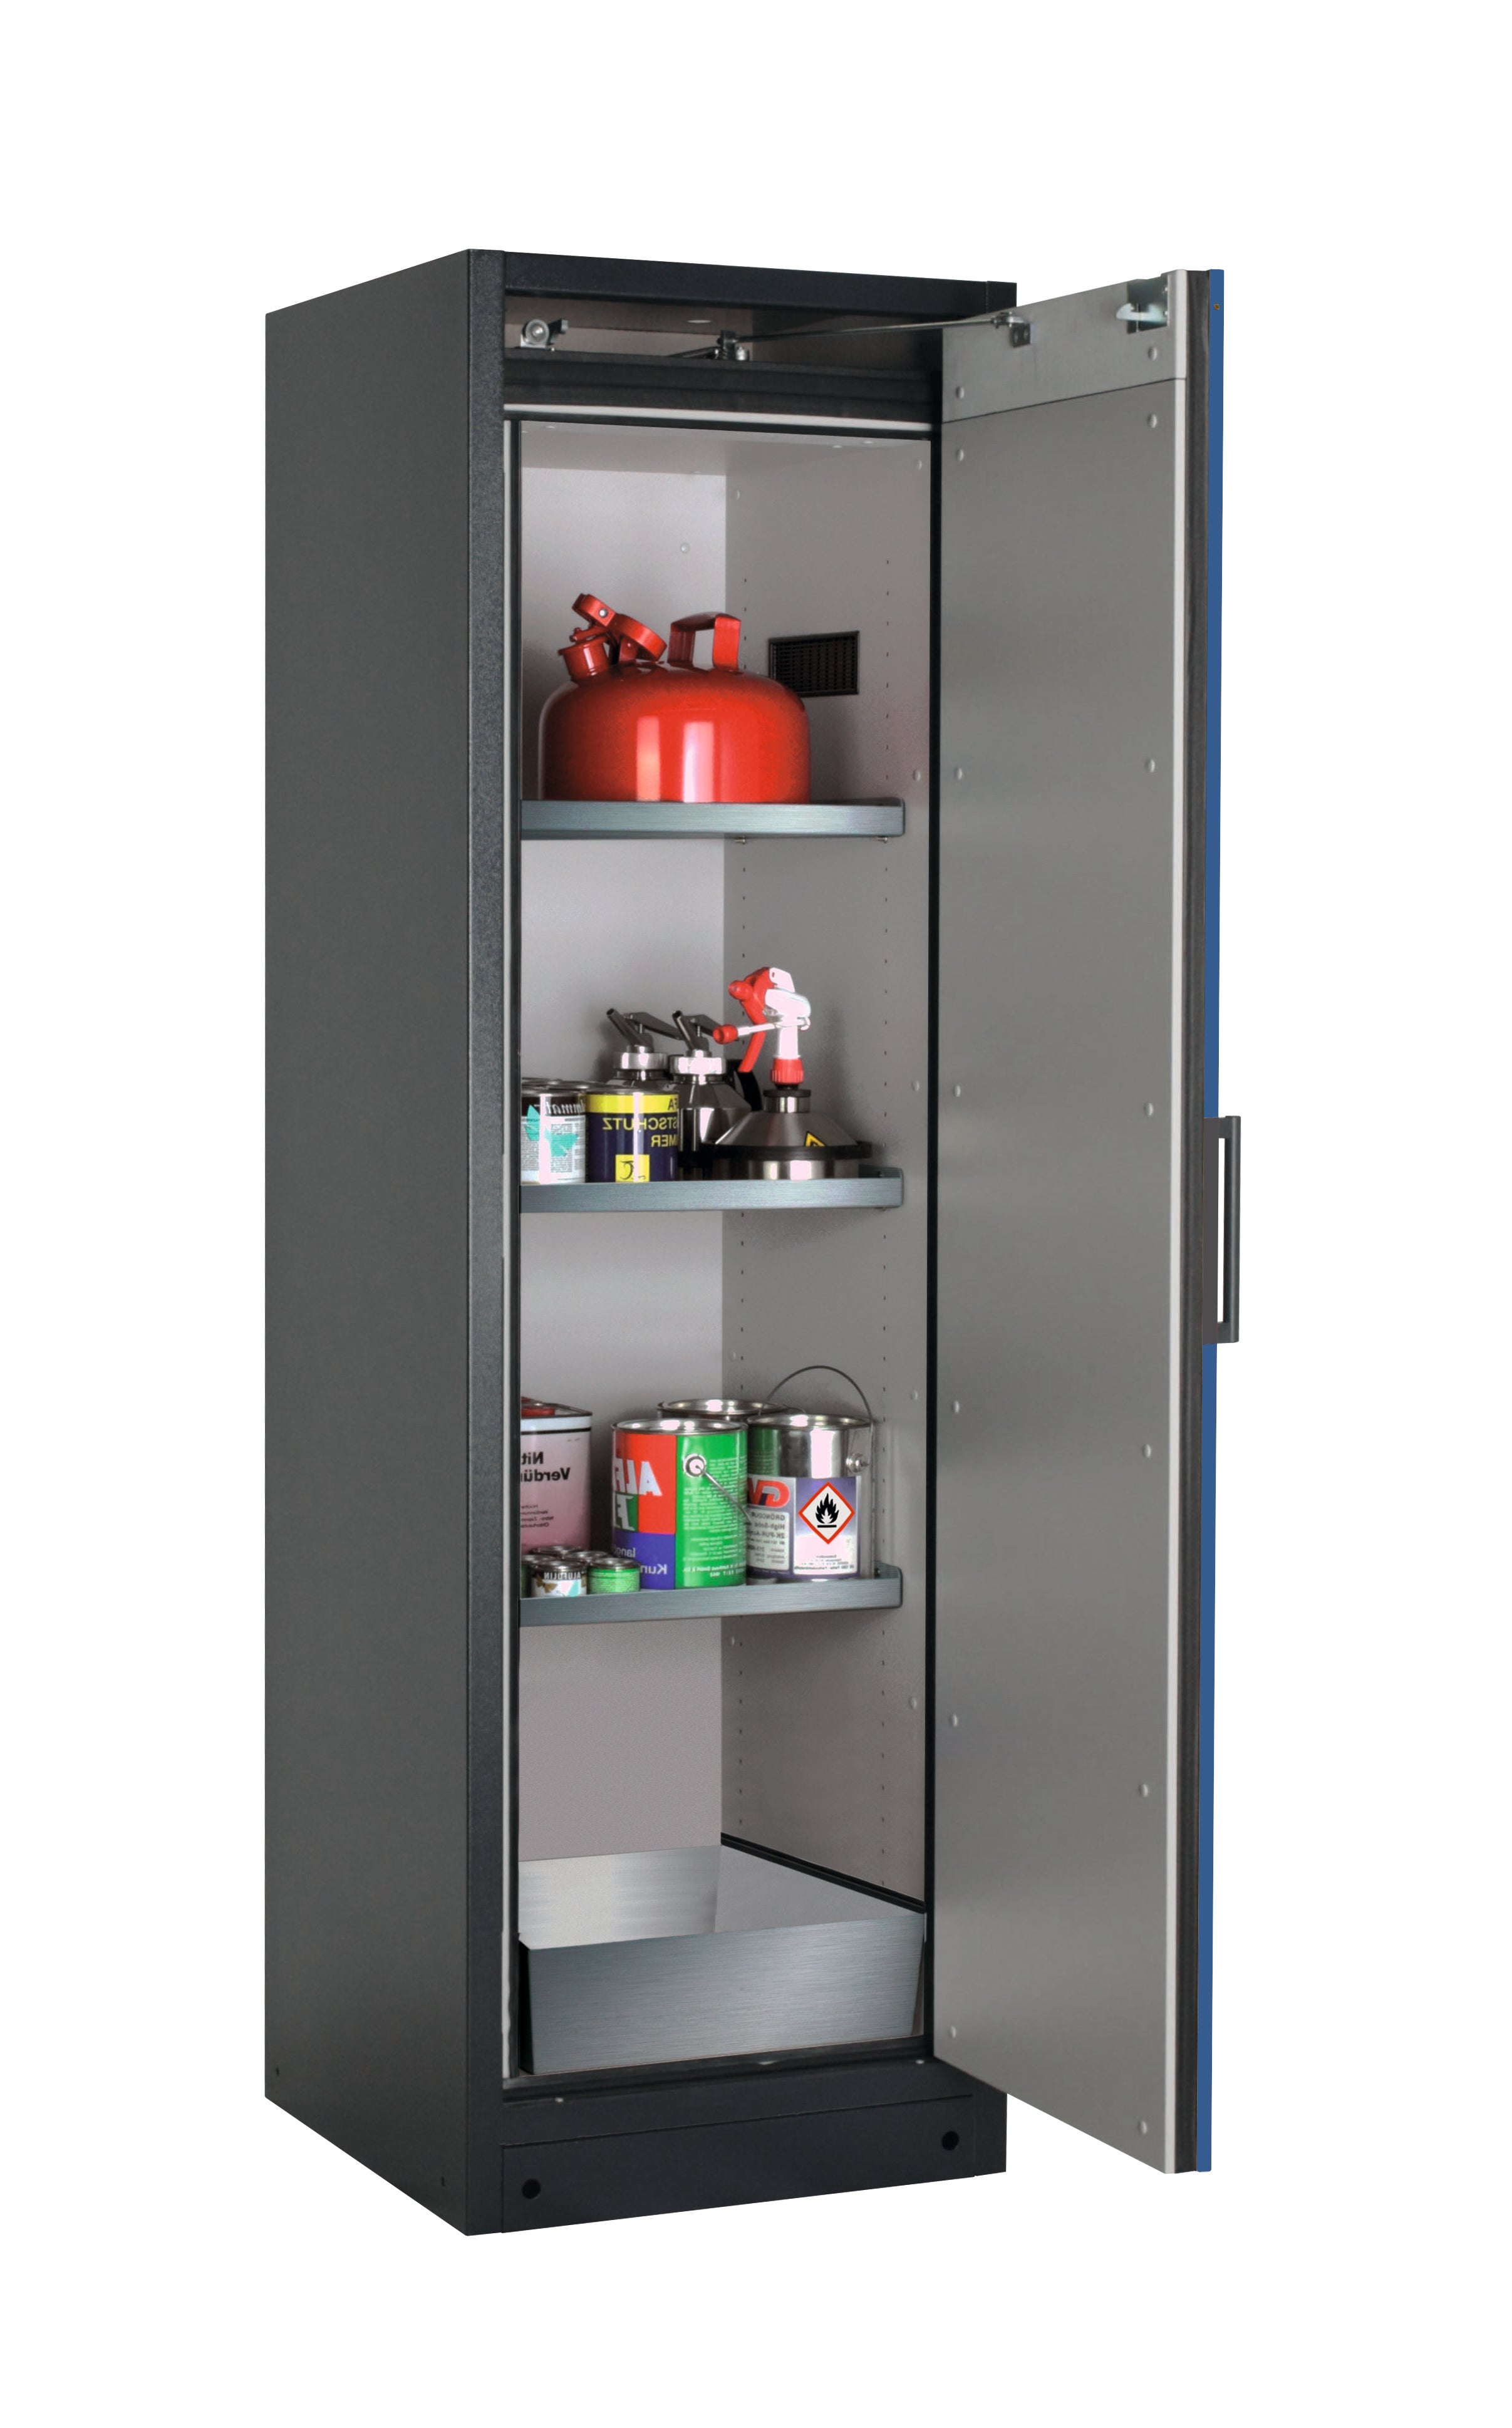 Type 90 safety storage cabinet Q-CLASSIC-90 model Q90.195.060.R in gentian blue RAL 5010 with 3x shelf standard (stainless steel 1.4301),